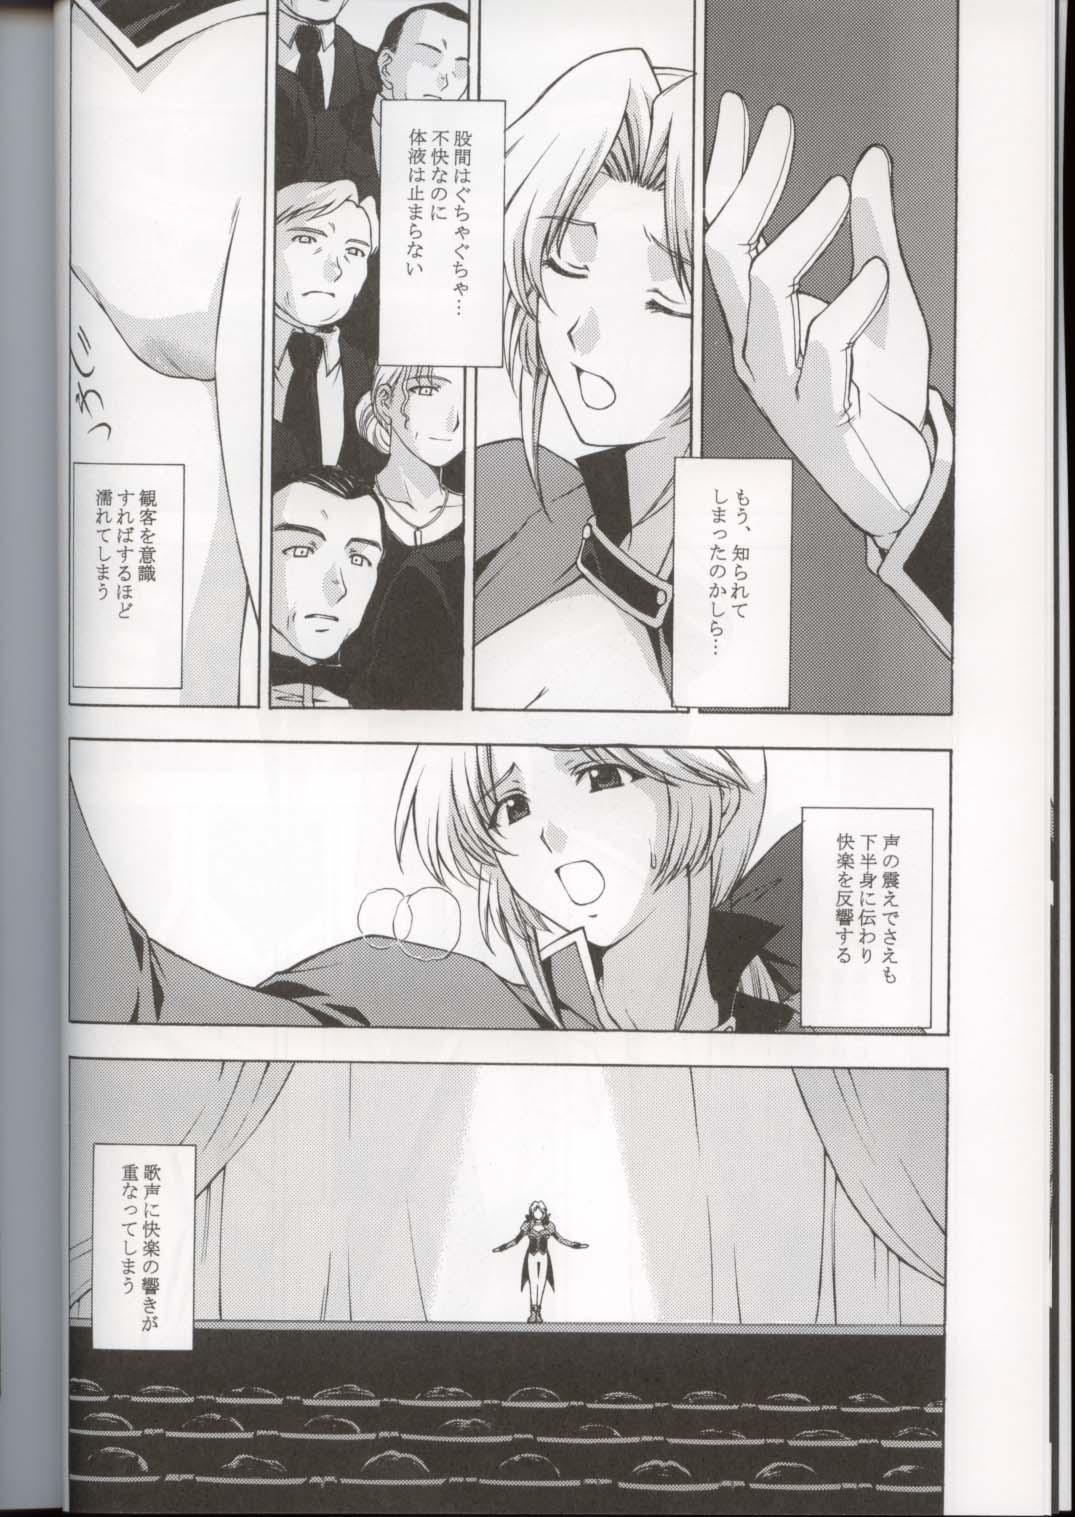 Jerking Off Utahime no Shouzou 3 - Dead or alive Youth Porn - Page 12